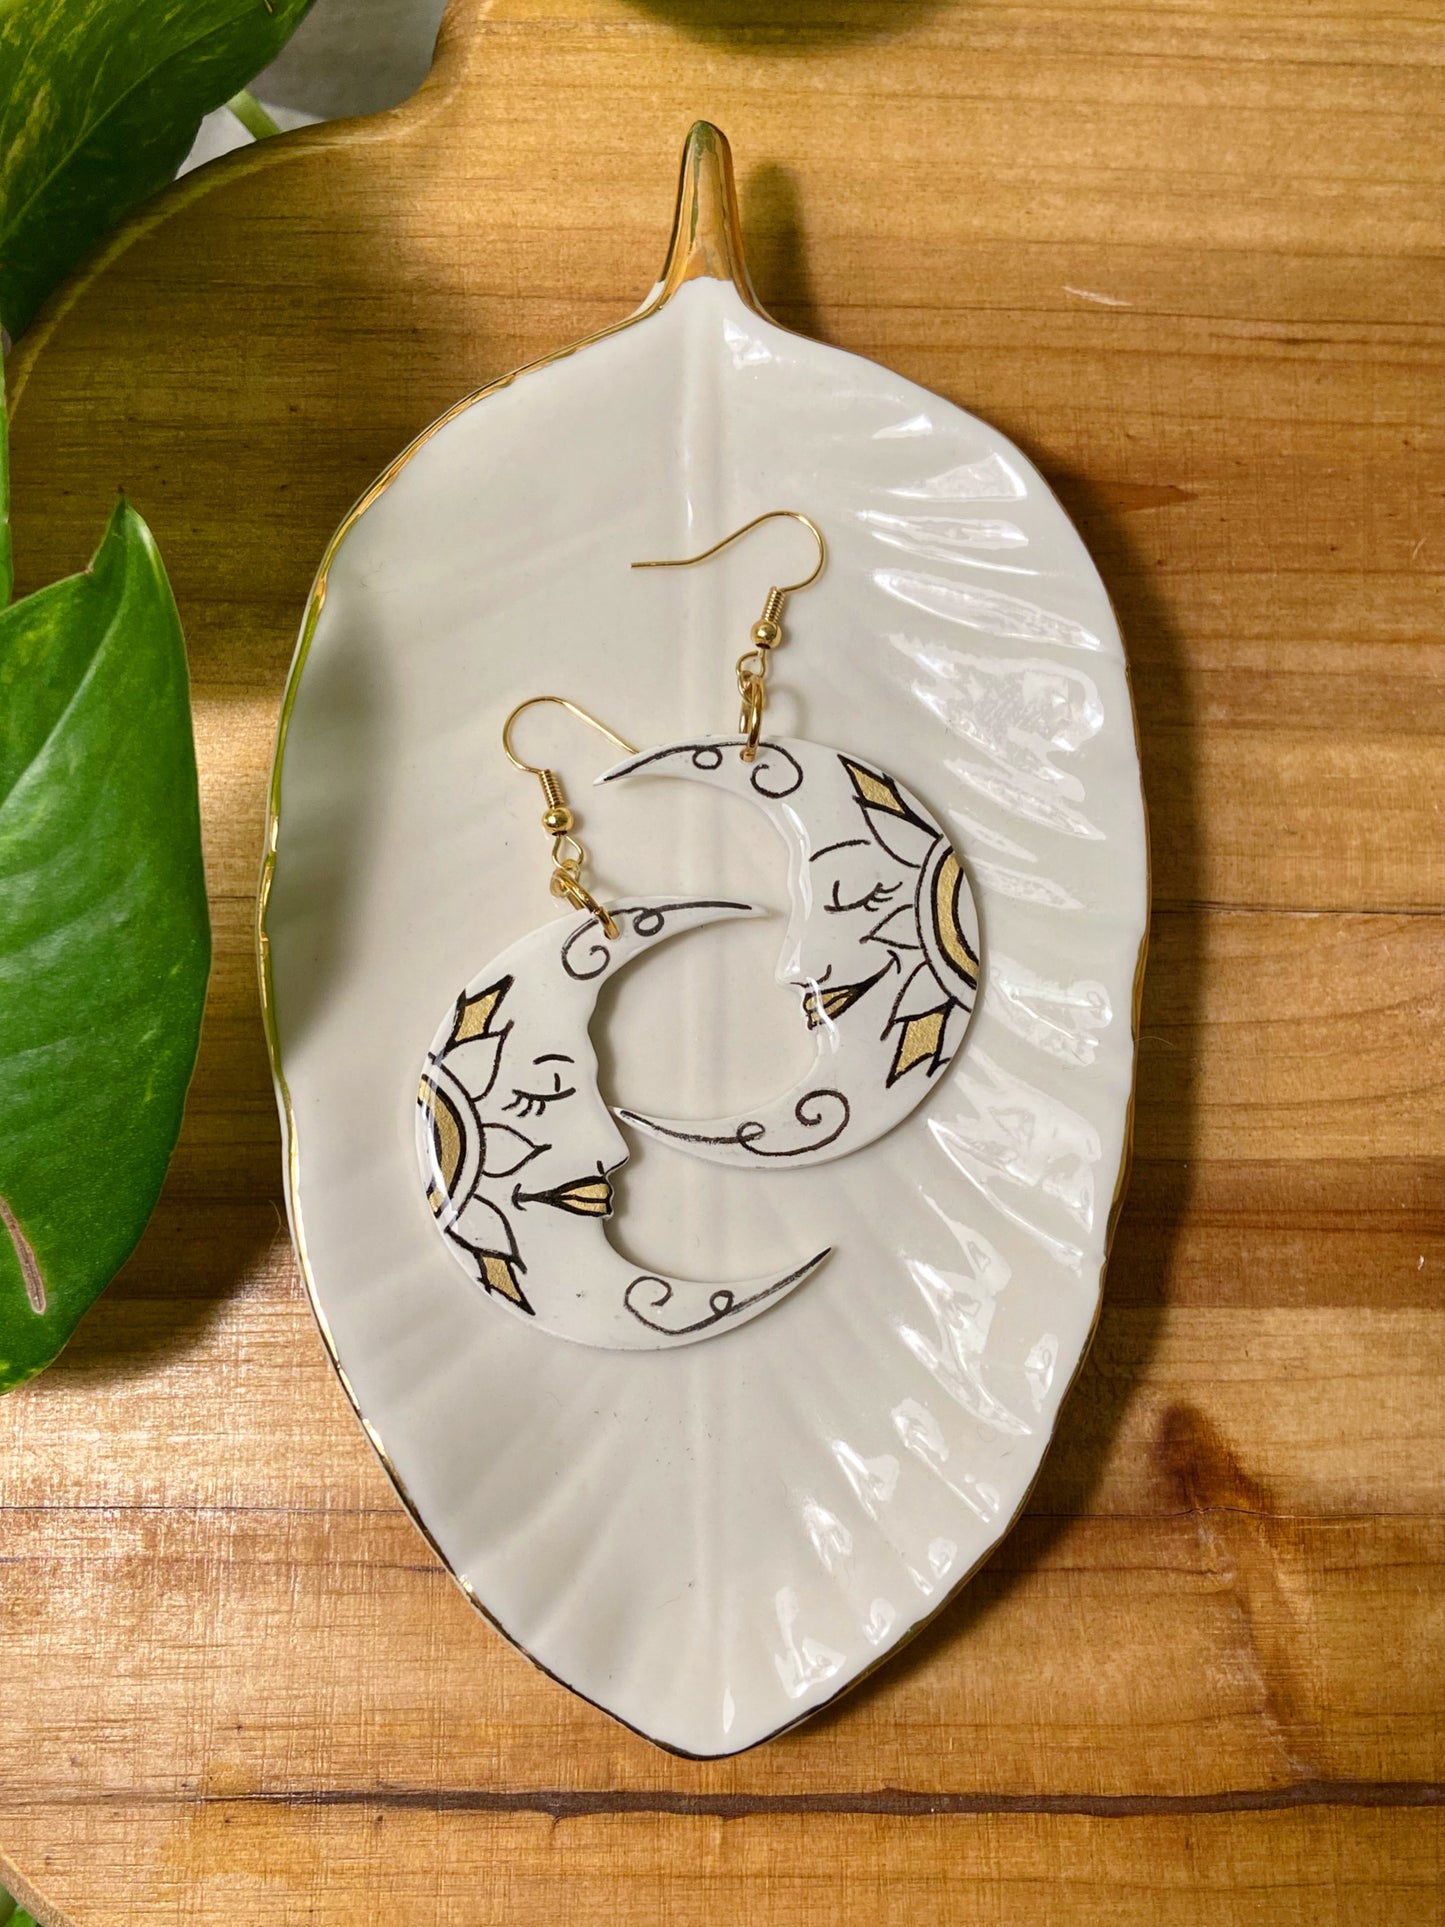 Sleepy Moons- White & gold crescent moon earrings with handpainted faces & mandalas